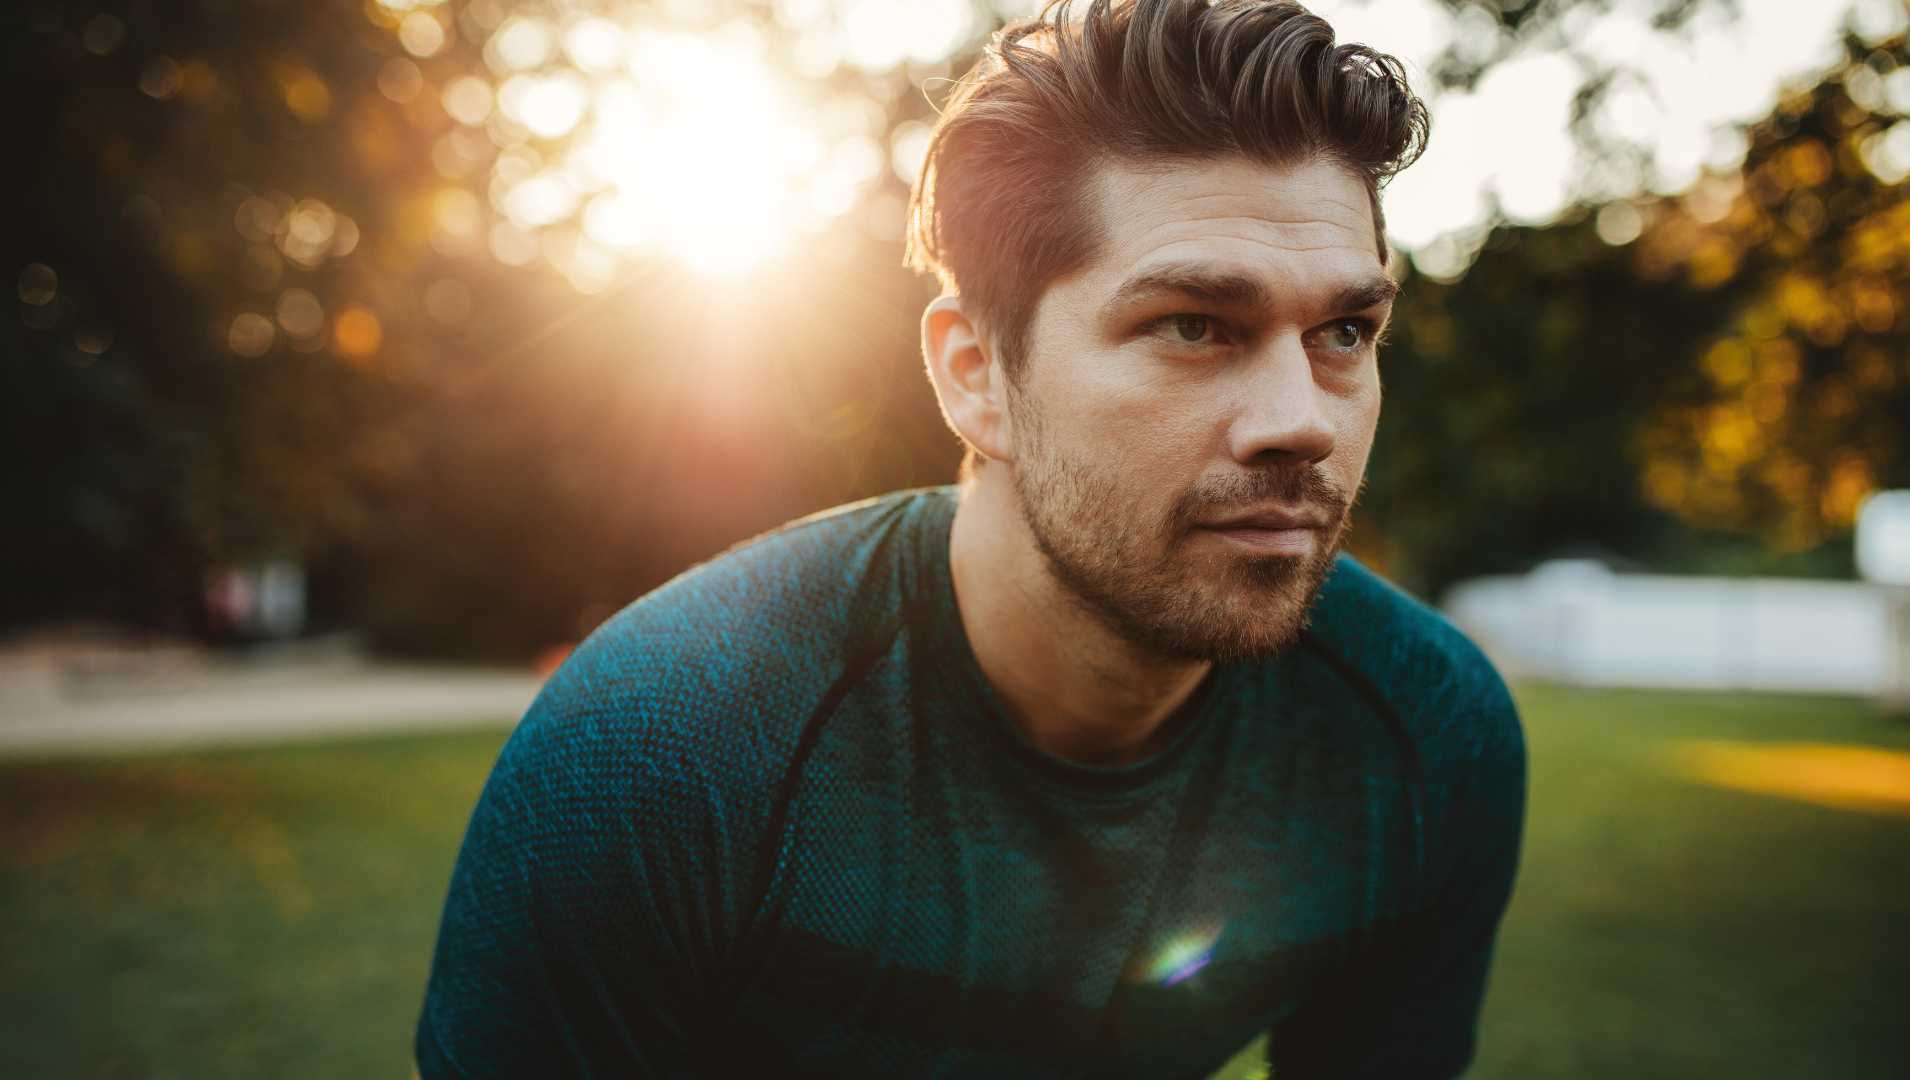 Man looks into the distance in fitness gear during workout as sun rises in a park